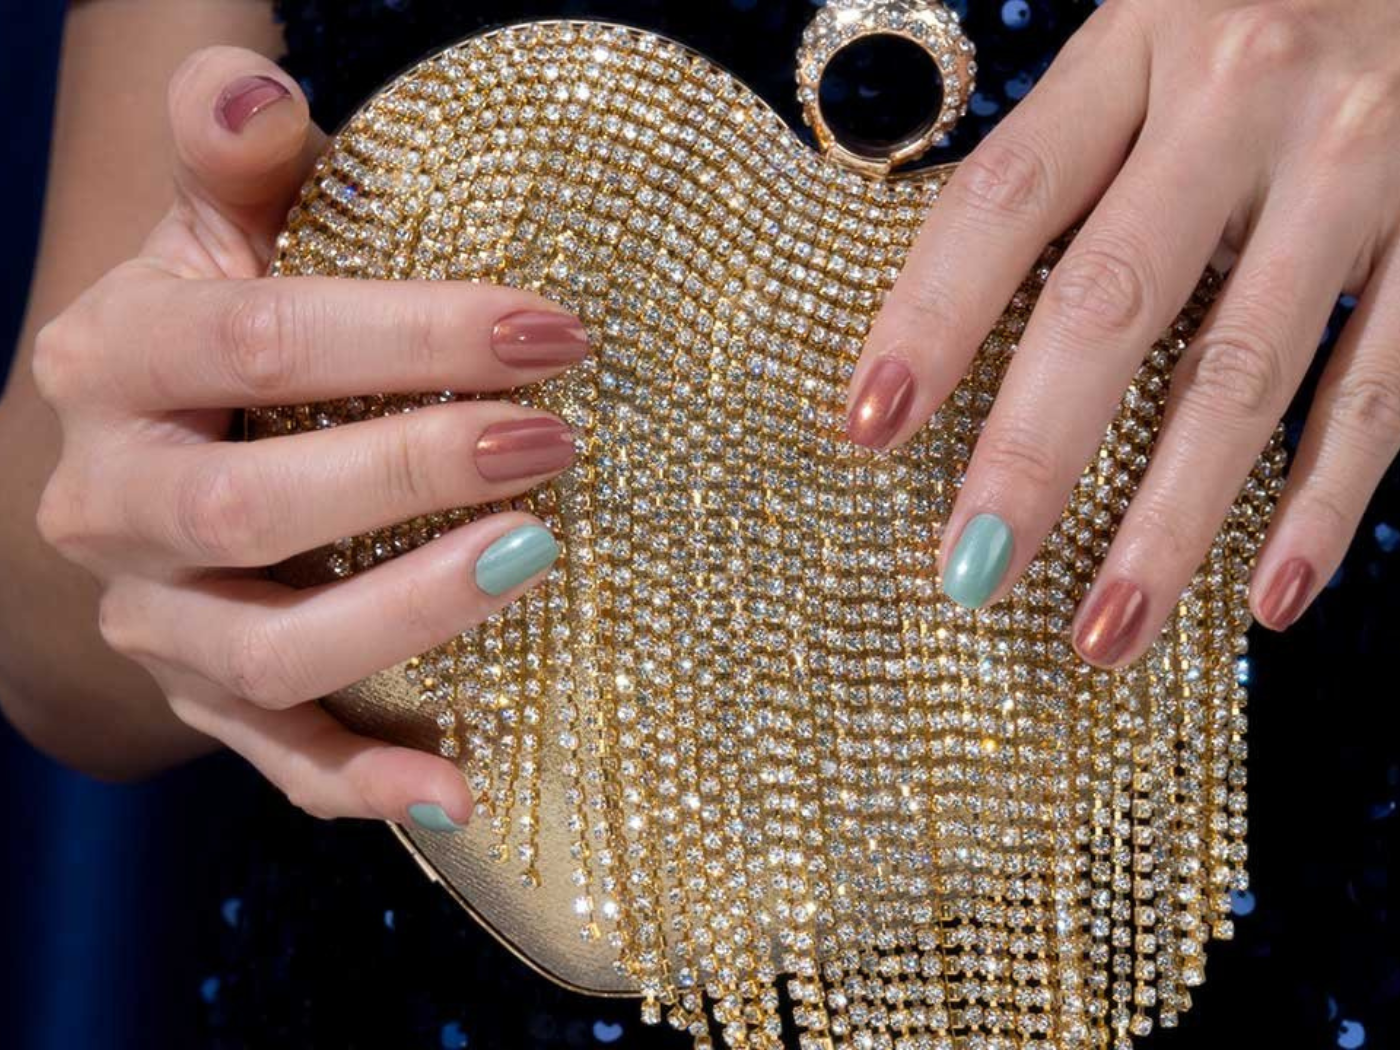 Hands holding a beaded sparkling handbag, with nails painted alternately with teal and brown metallic polish.